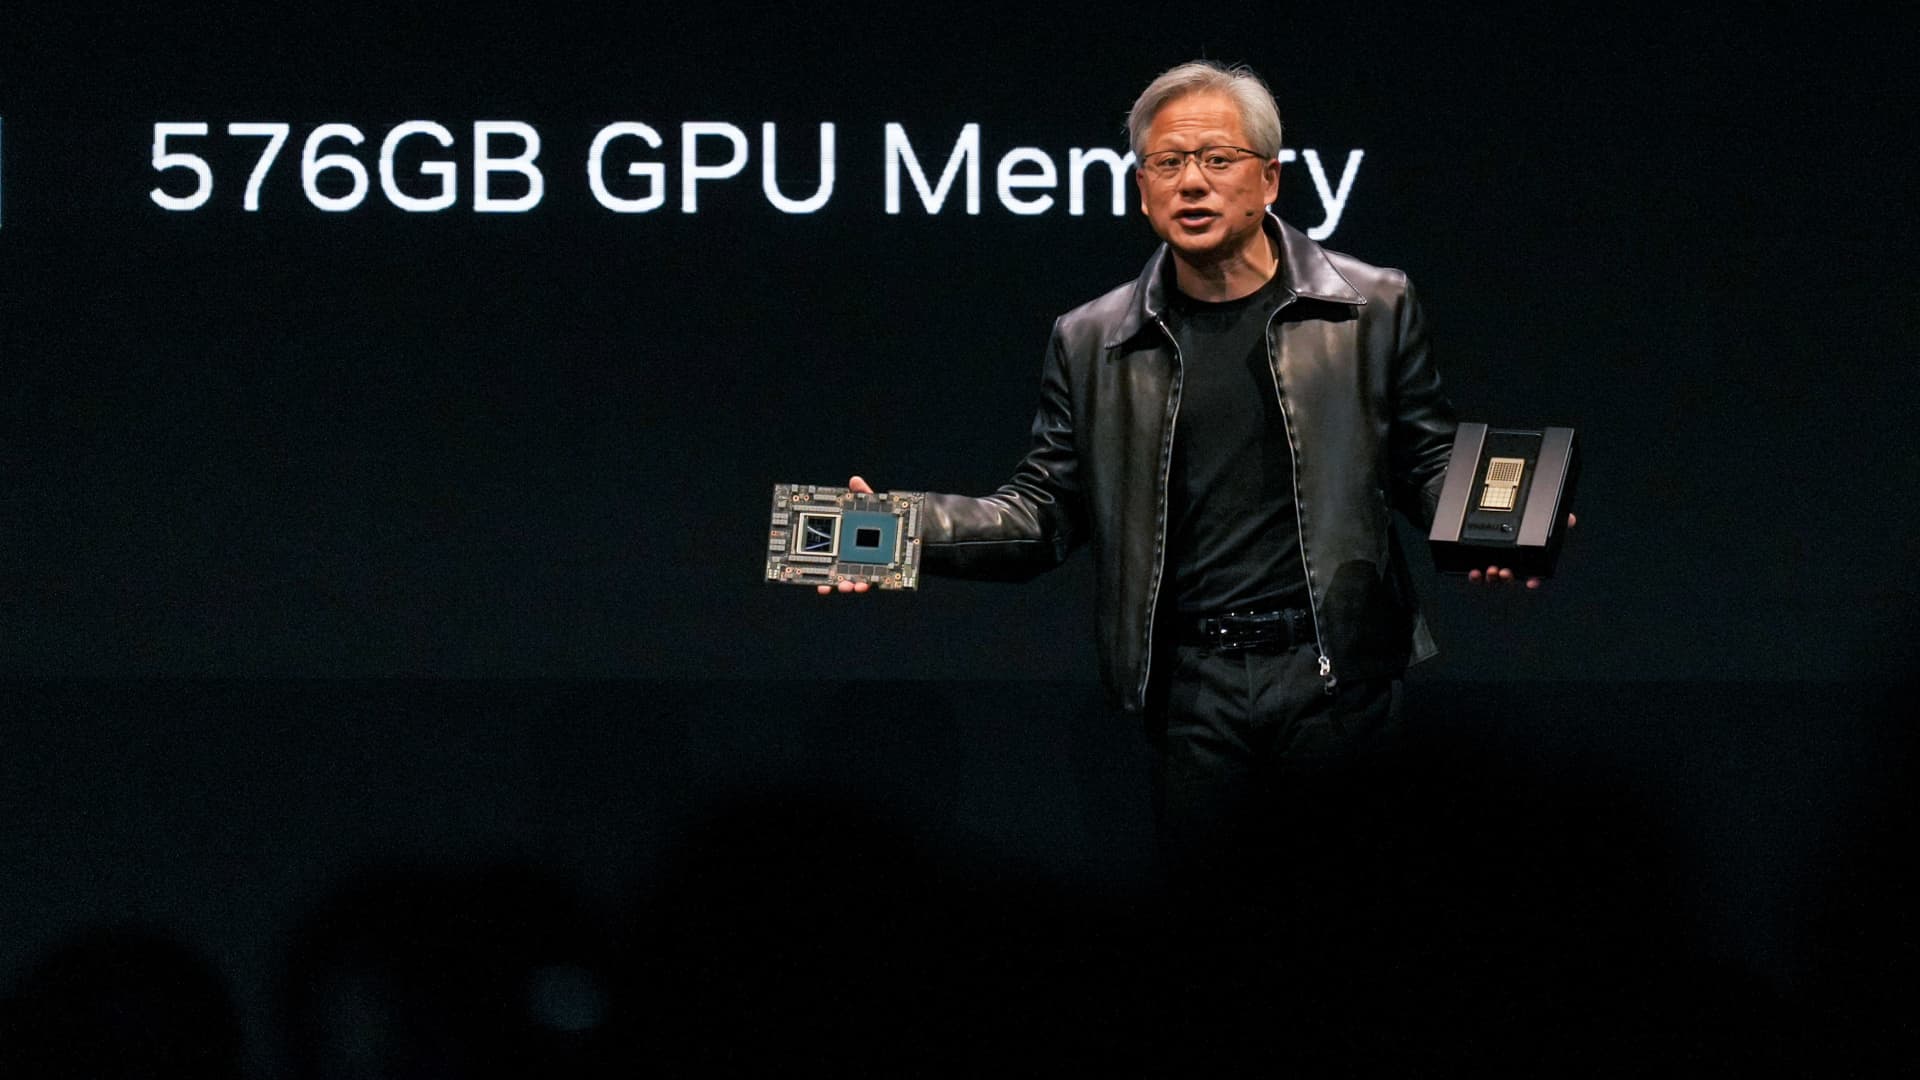 ‘Everyone is a programmer’ with generative A.I., says Nvidia chief